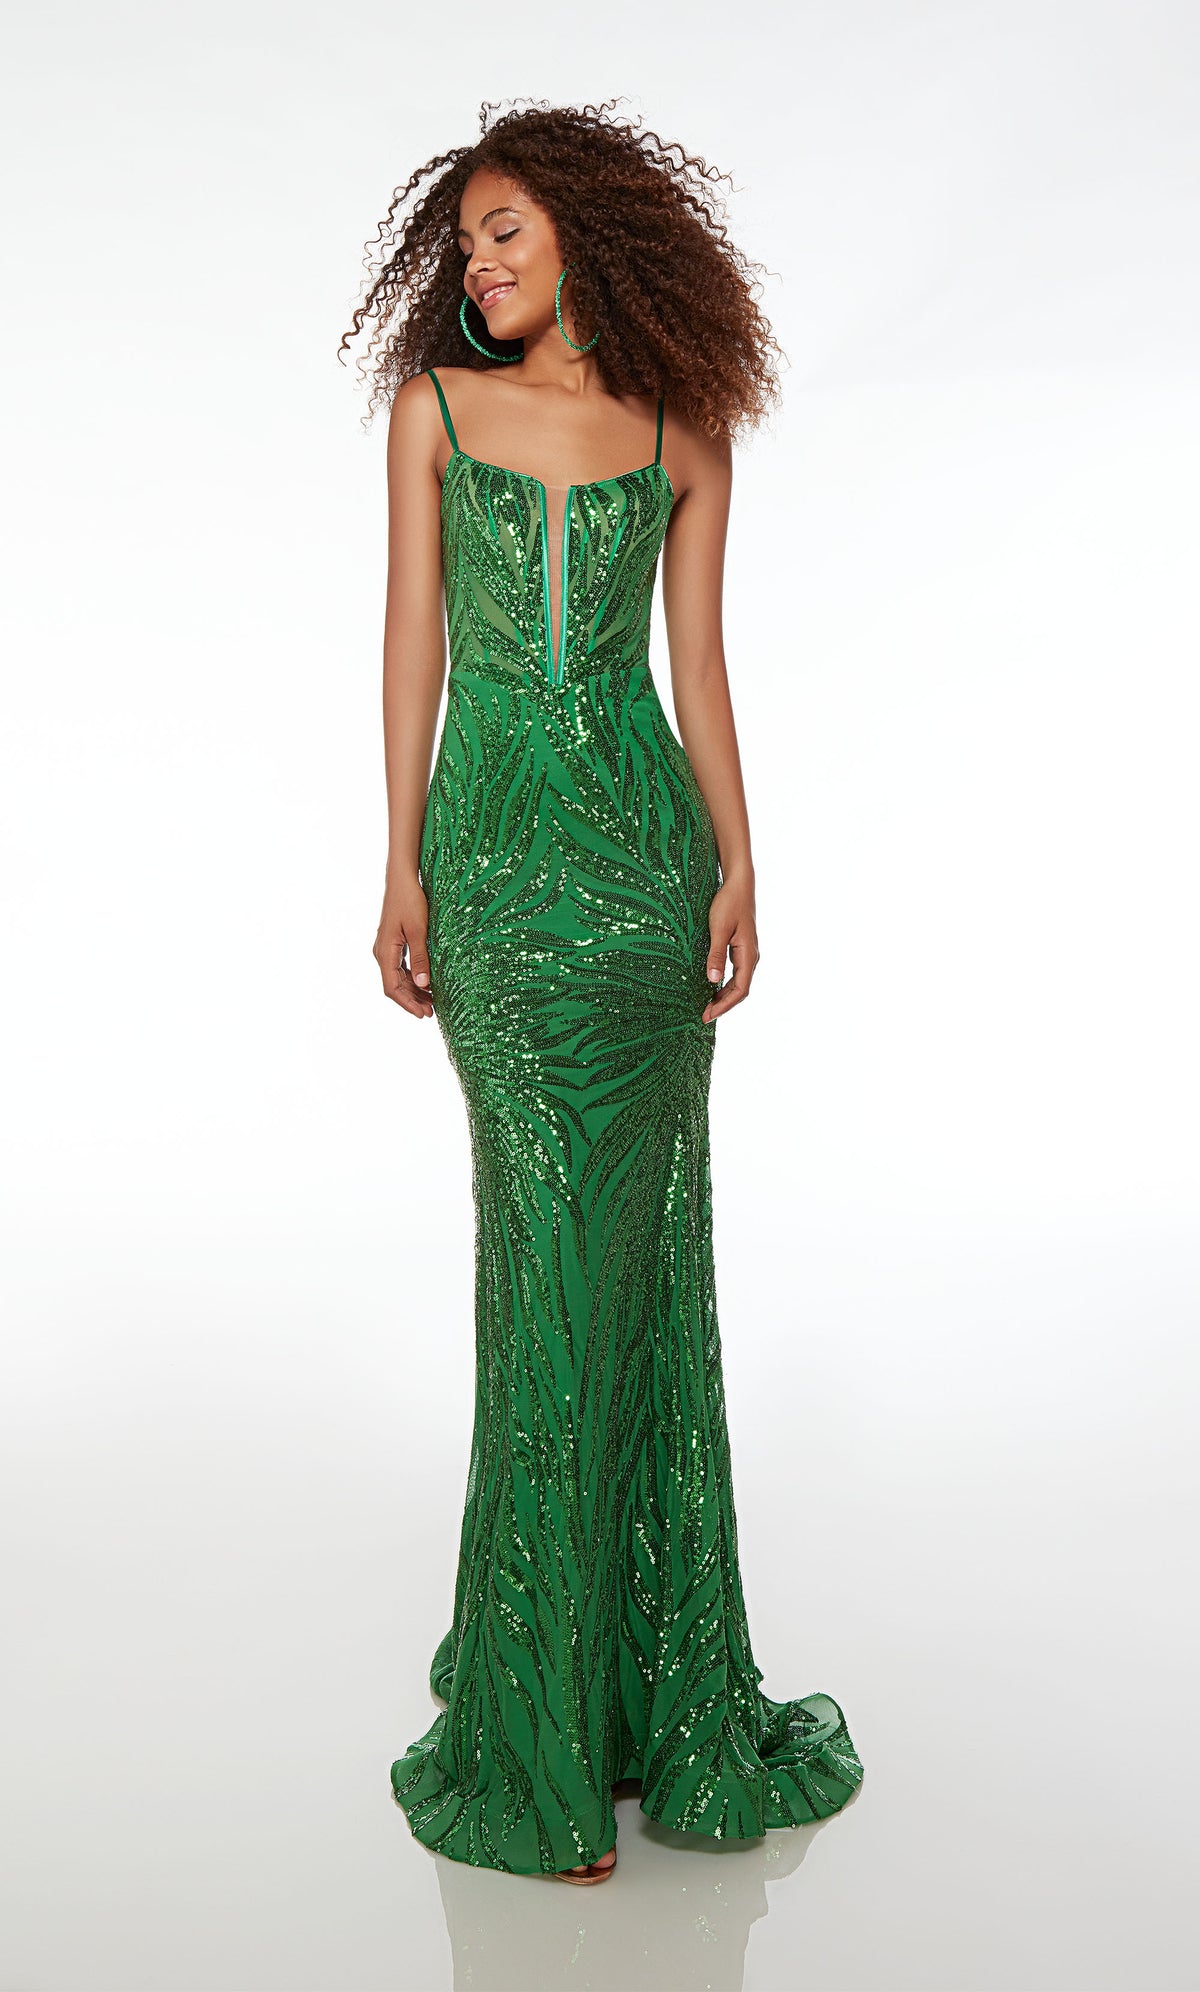 Green mermaid dress with an plunging neckline, spaghetti straps, lace-up back, train, and an unique sequin design throughout for an refreshing and stylish look.